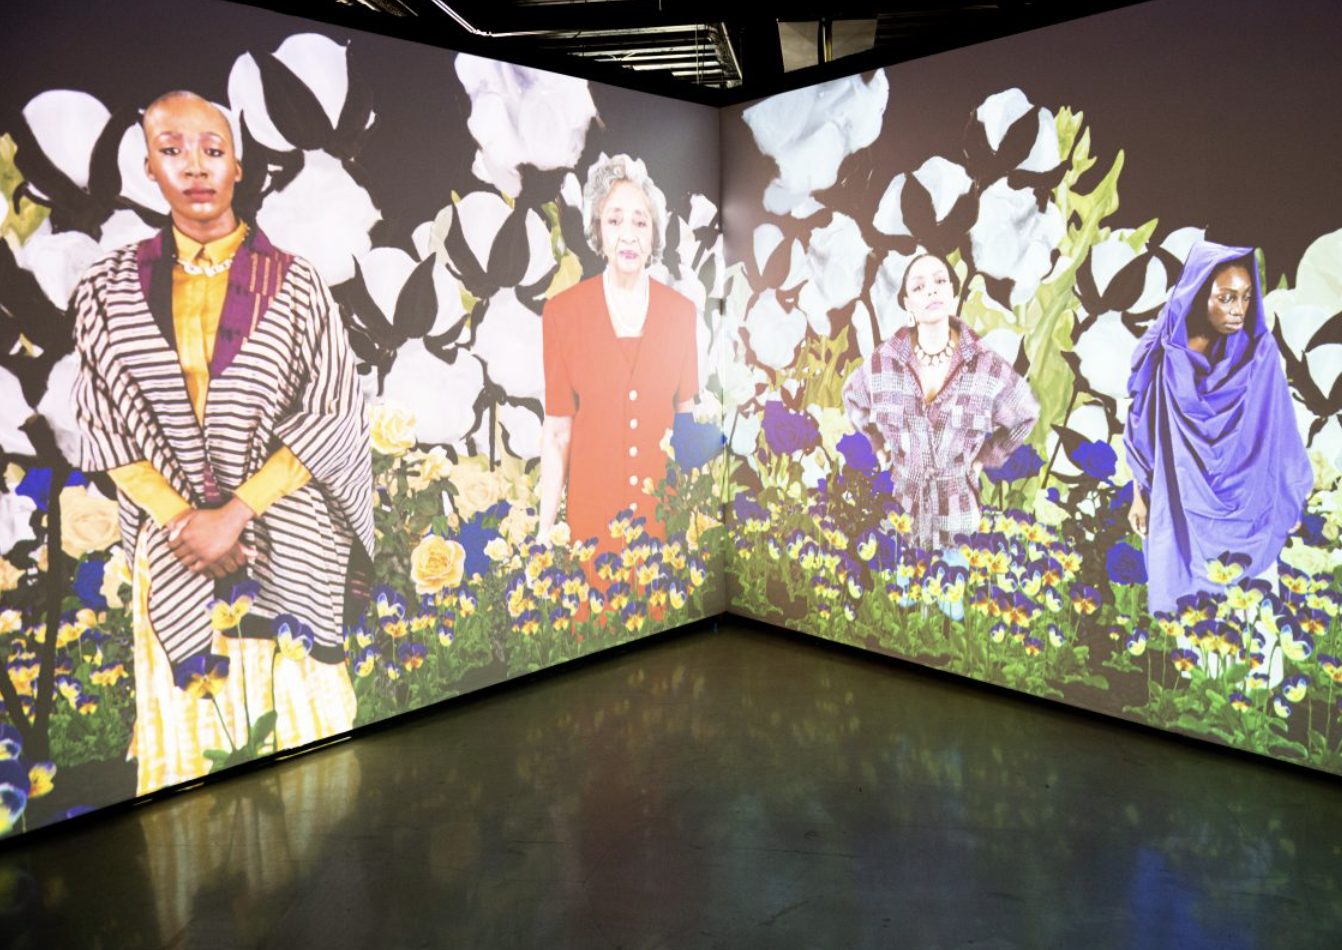 An installation view of Stephanie Dinkins "Secret Garden" (2021) at Stamps Gallery, University of Michigan. The interactive video projection shows four generations of black women standing in a garden where cotton, roses, and okra grow. 